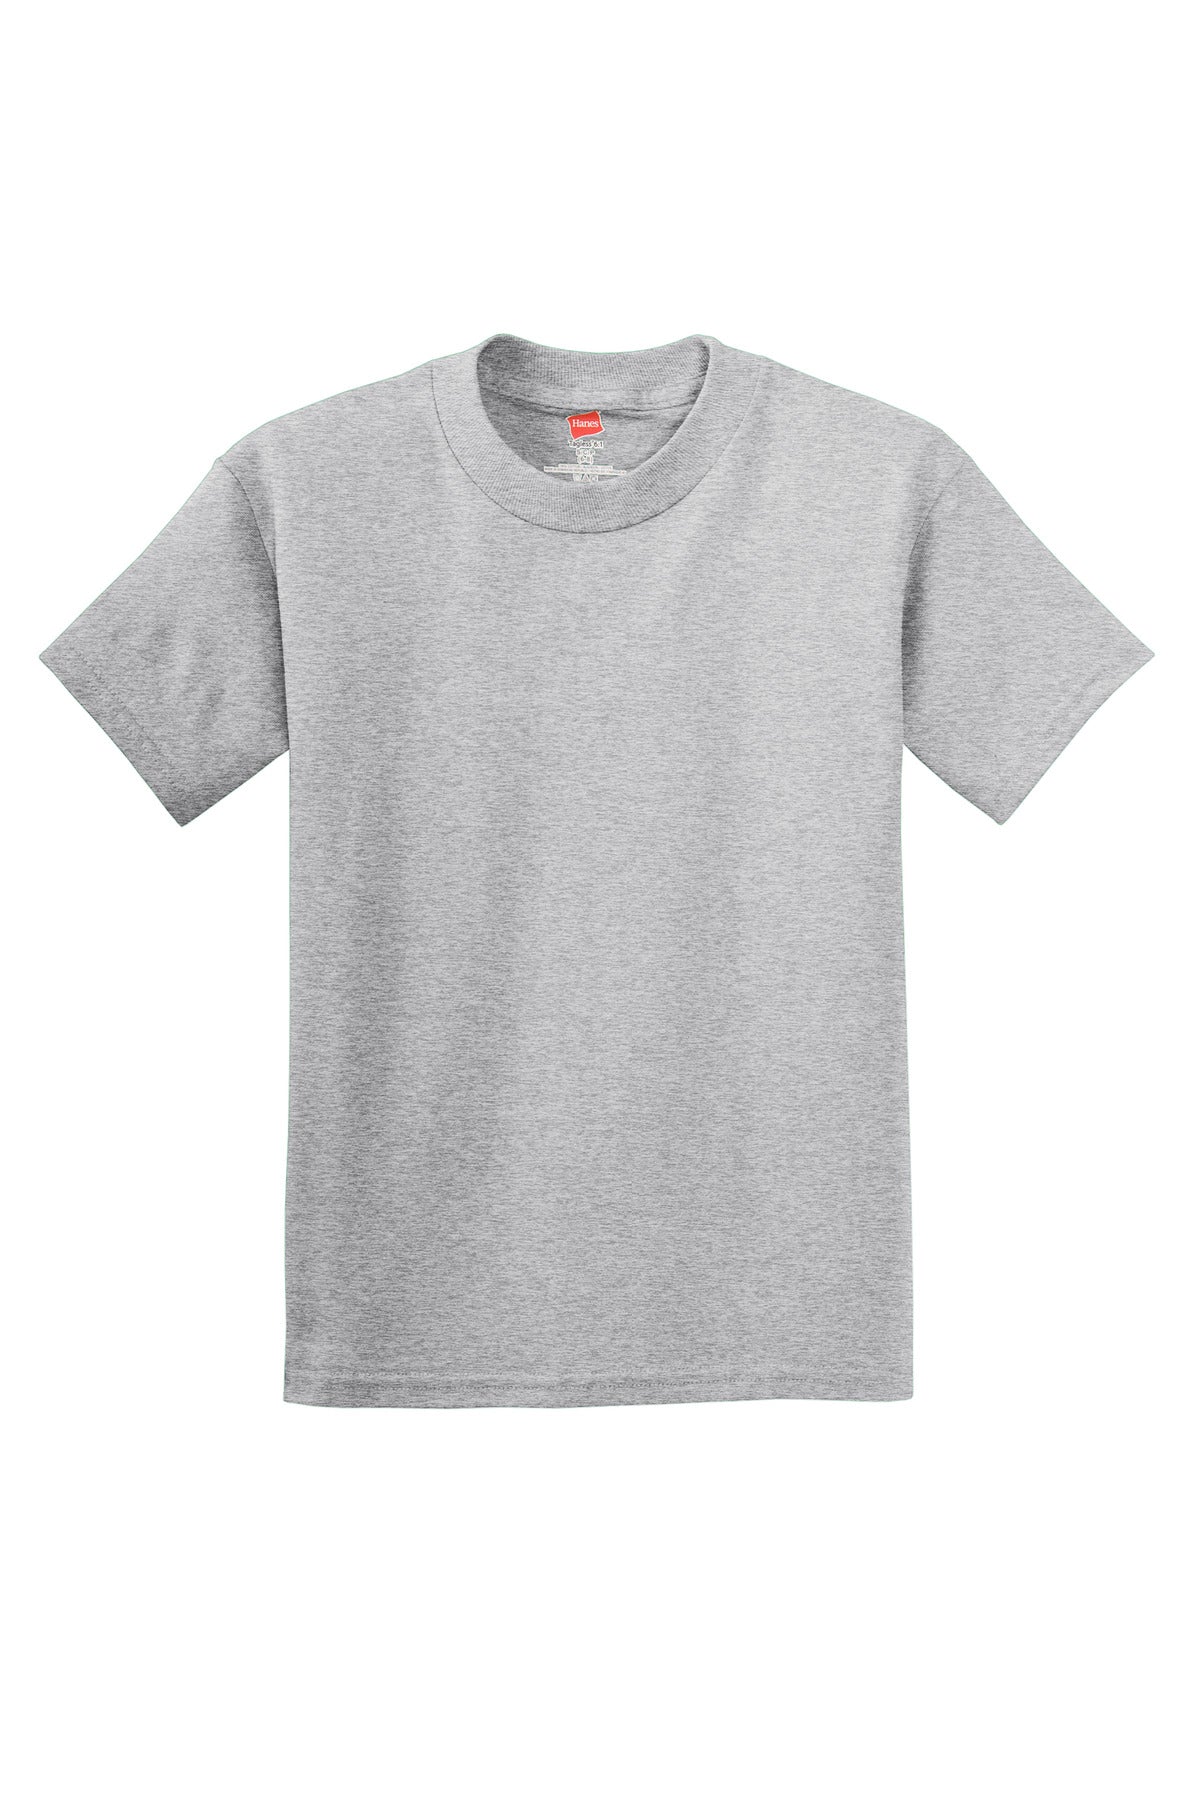 Photo of Hanes T-Shirts 5450  color  Light Steel